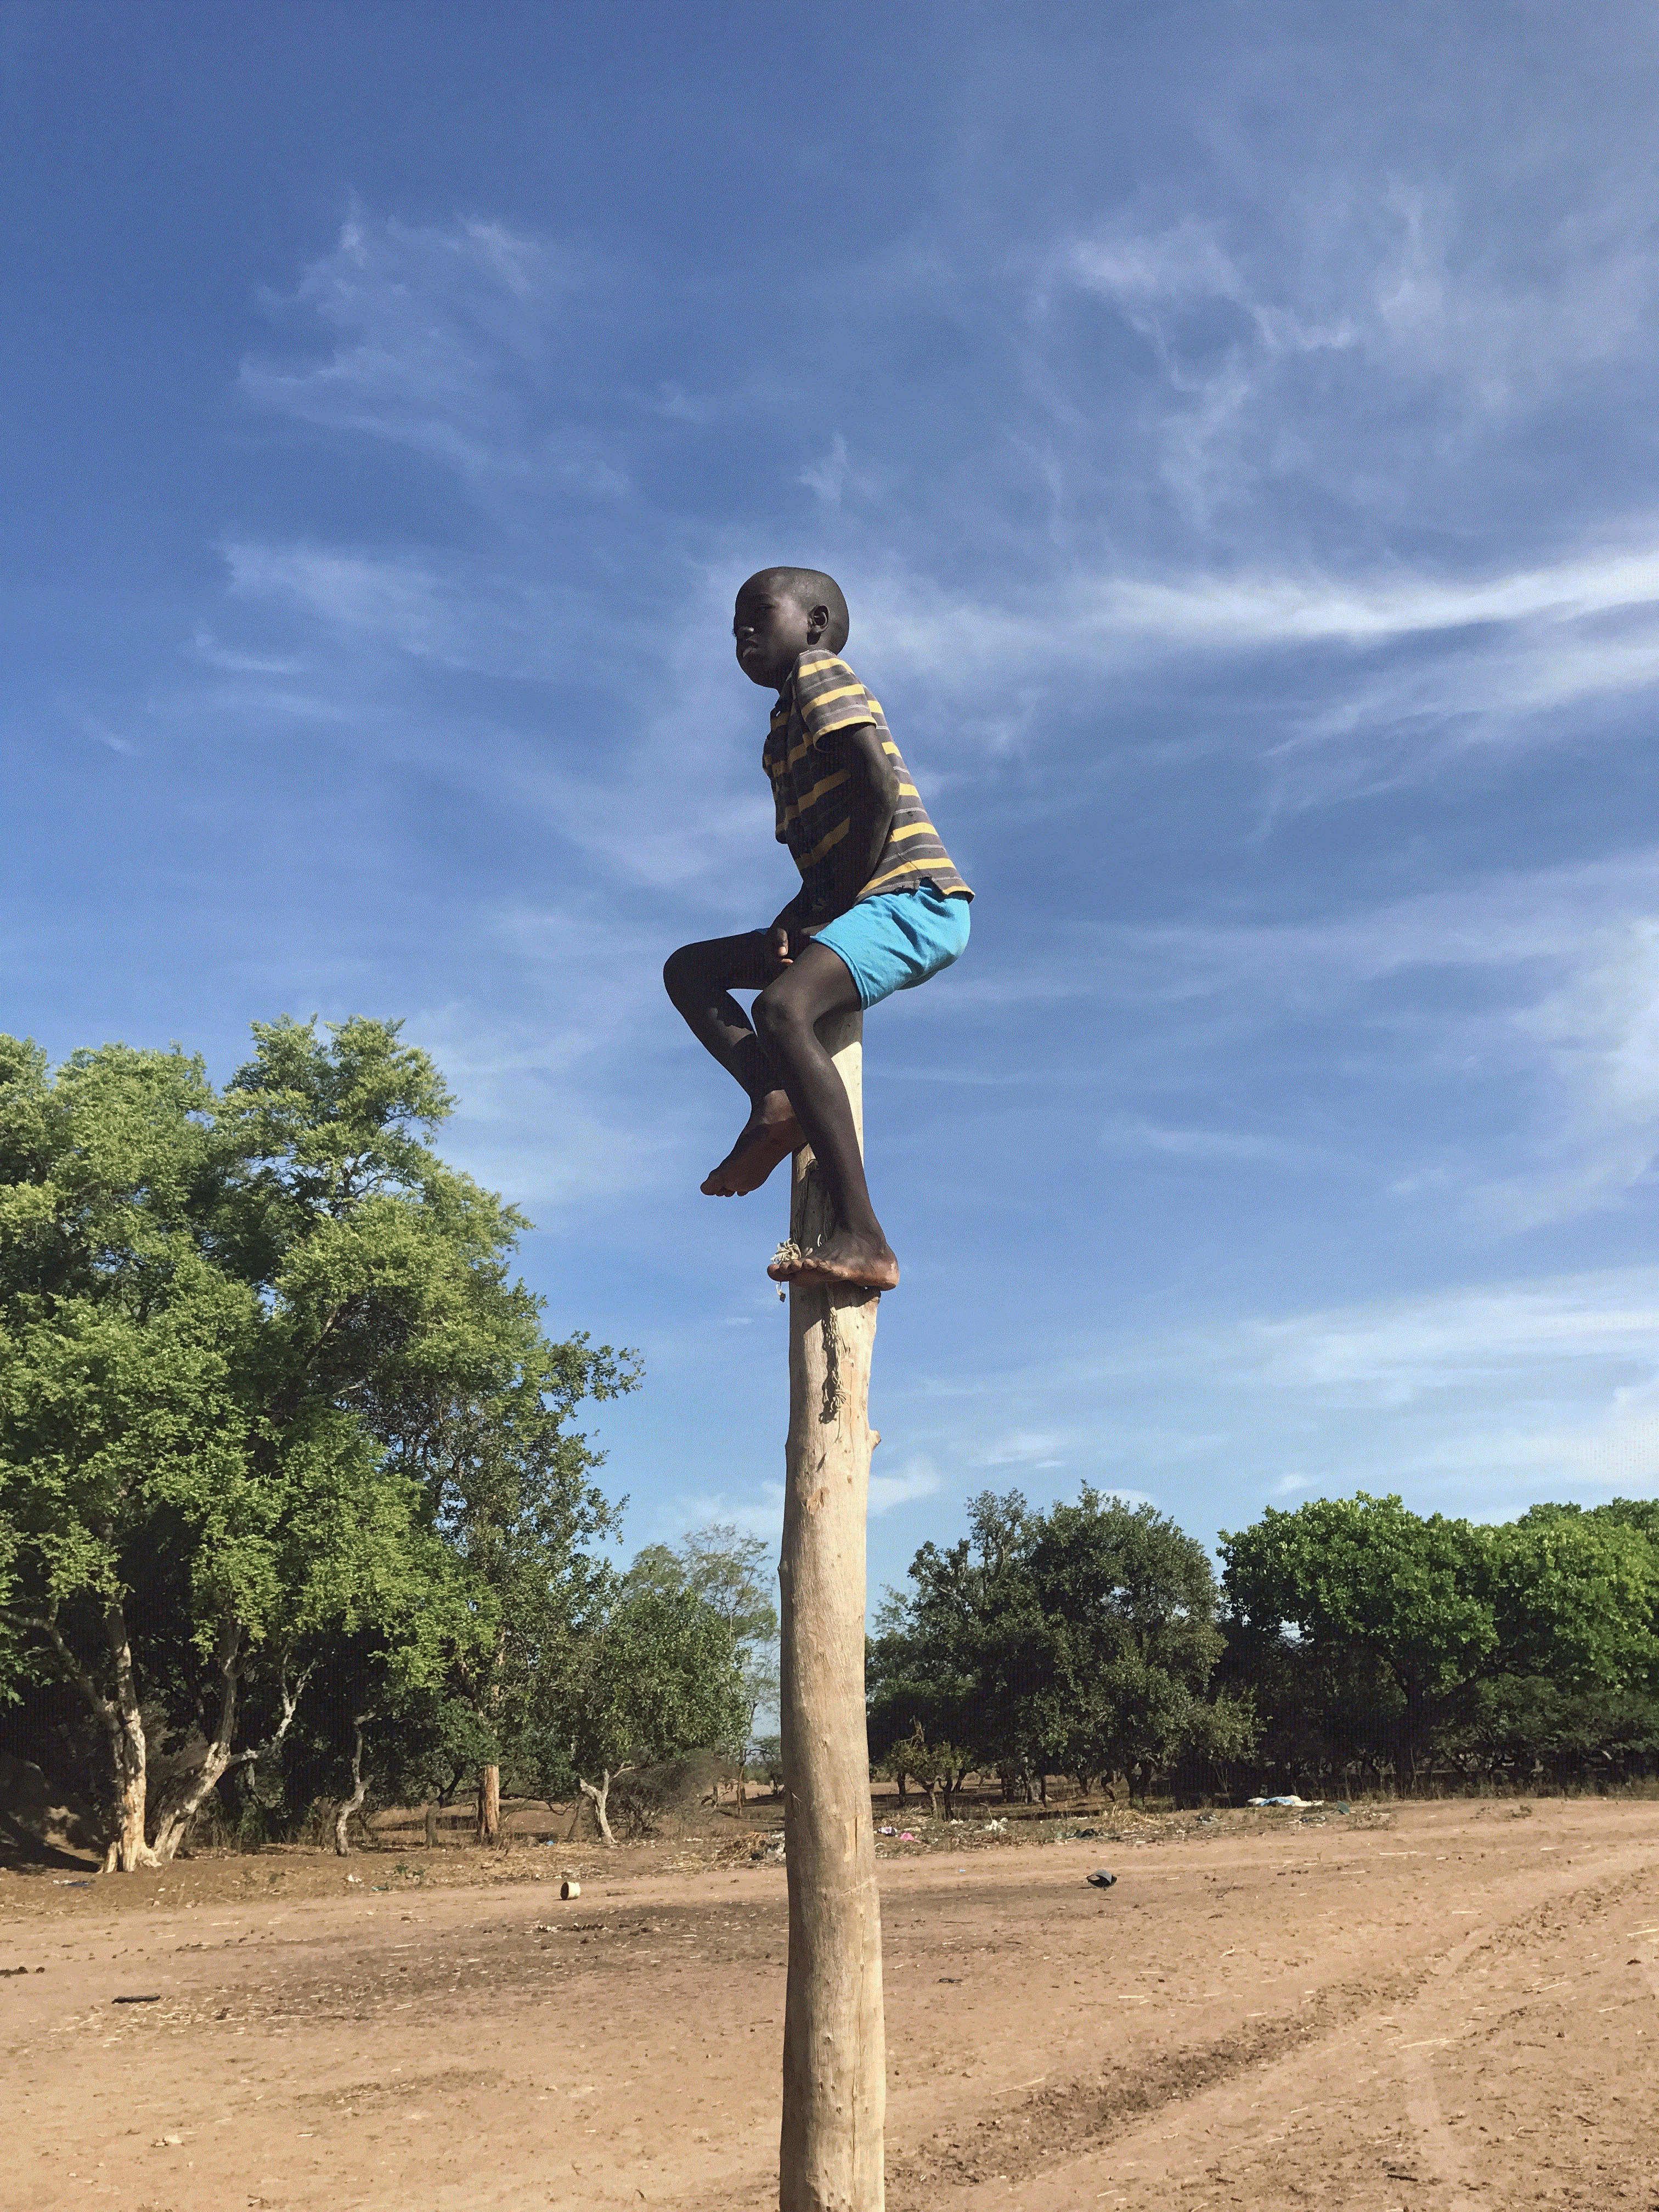 A child sits on top of a tall pole.

"To me this picture represents the hope of a bright and better future for the Senegalese kids. Upon visiting NdjiaNdjia, a village in Senegal, I couldn't help but notice that most kids were uneducated because they barely had enough schools to accommodate all of them and in addition to that at a certain grade level the kids would have to drop out because there are no advanced school grades. Nevertheless this picture shows high aiming and being satisfied when you reach the top." Image and text by Perpetua Nkem. Senegal, 2017.